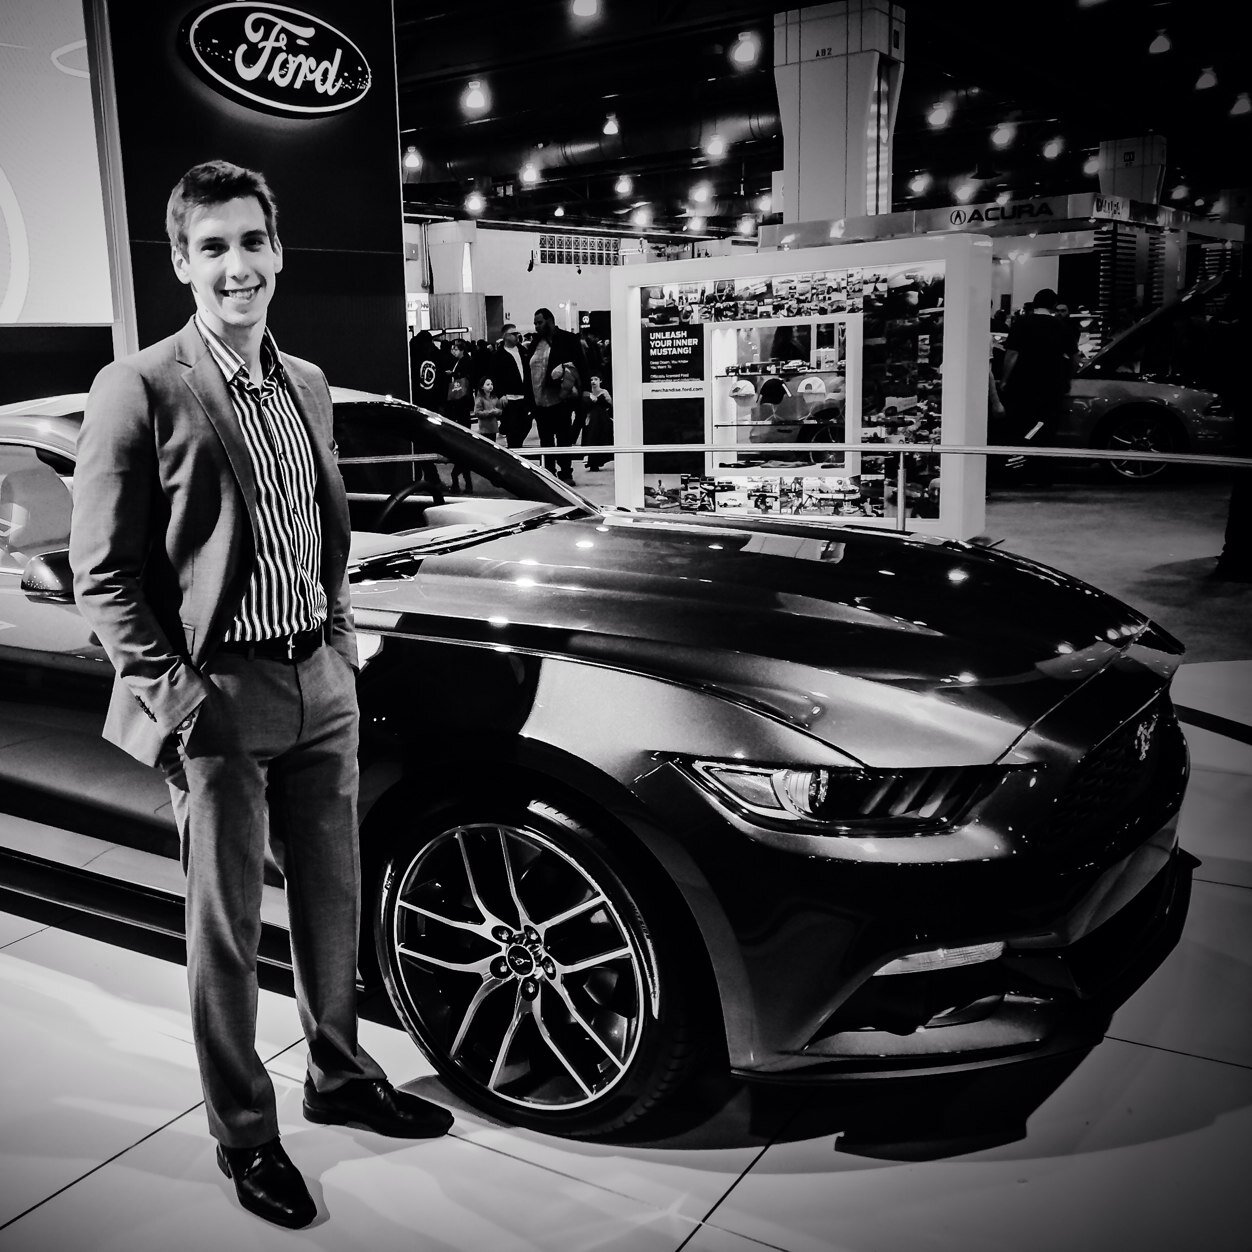 Ford Motor Company Product Specialist! Follow me to learn more about Ford and get the insider info on auto shows all across the USA!